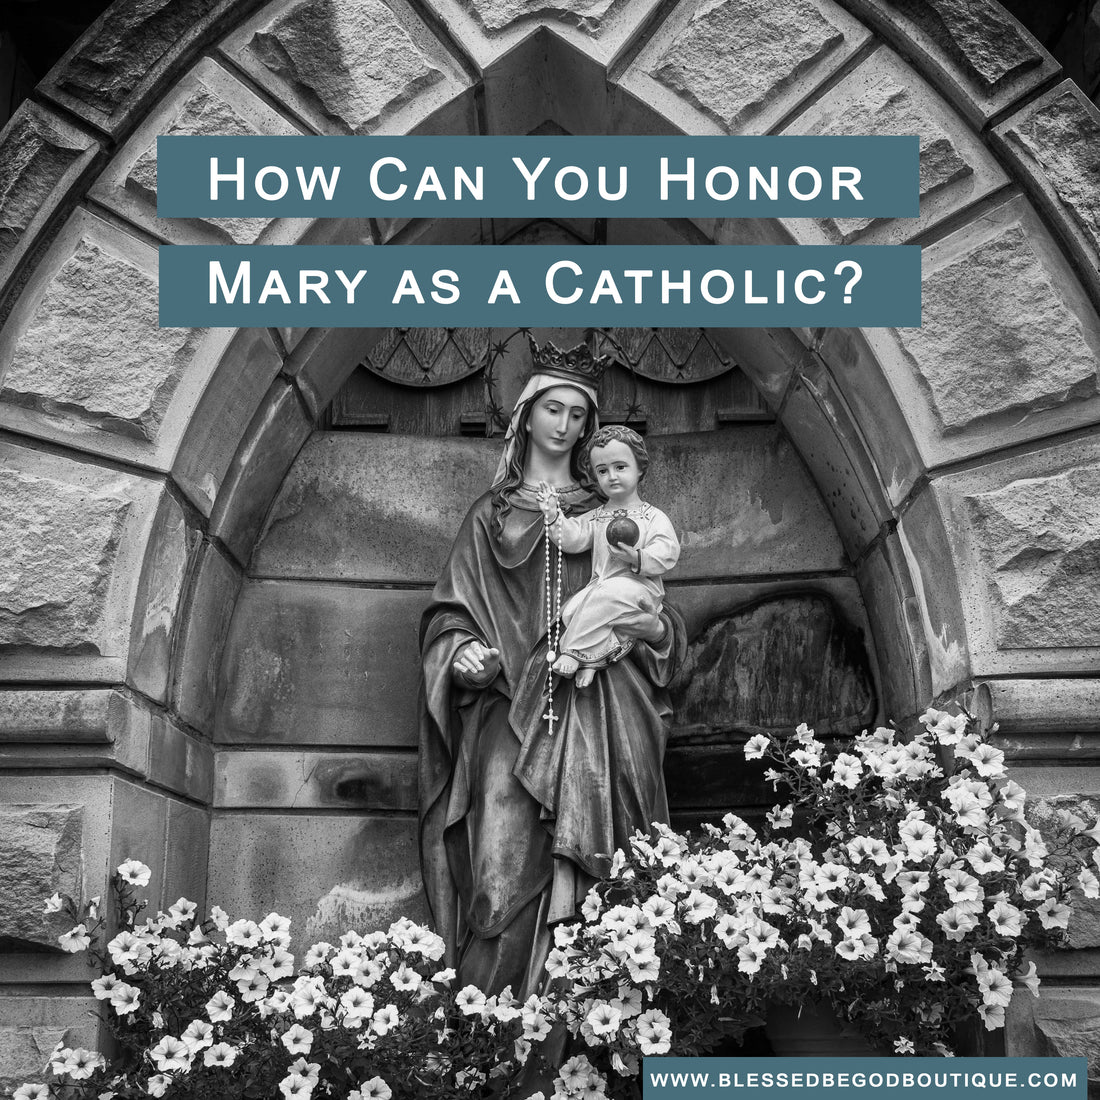 How Can You Honor Mary as a Catholic?